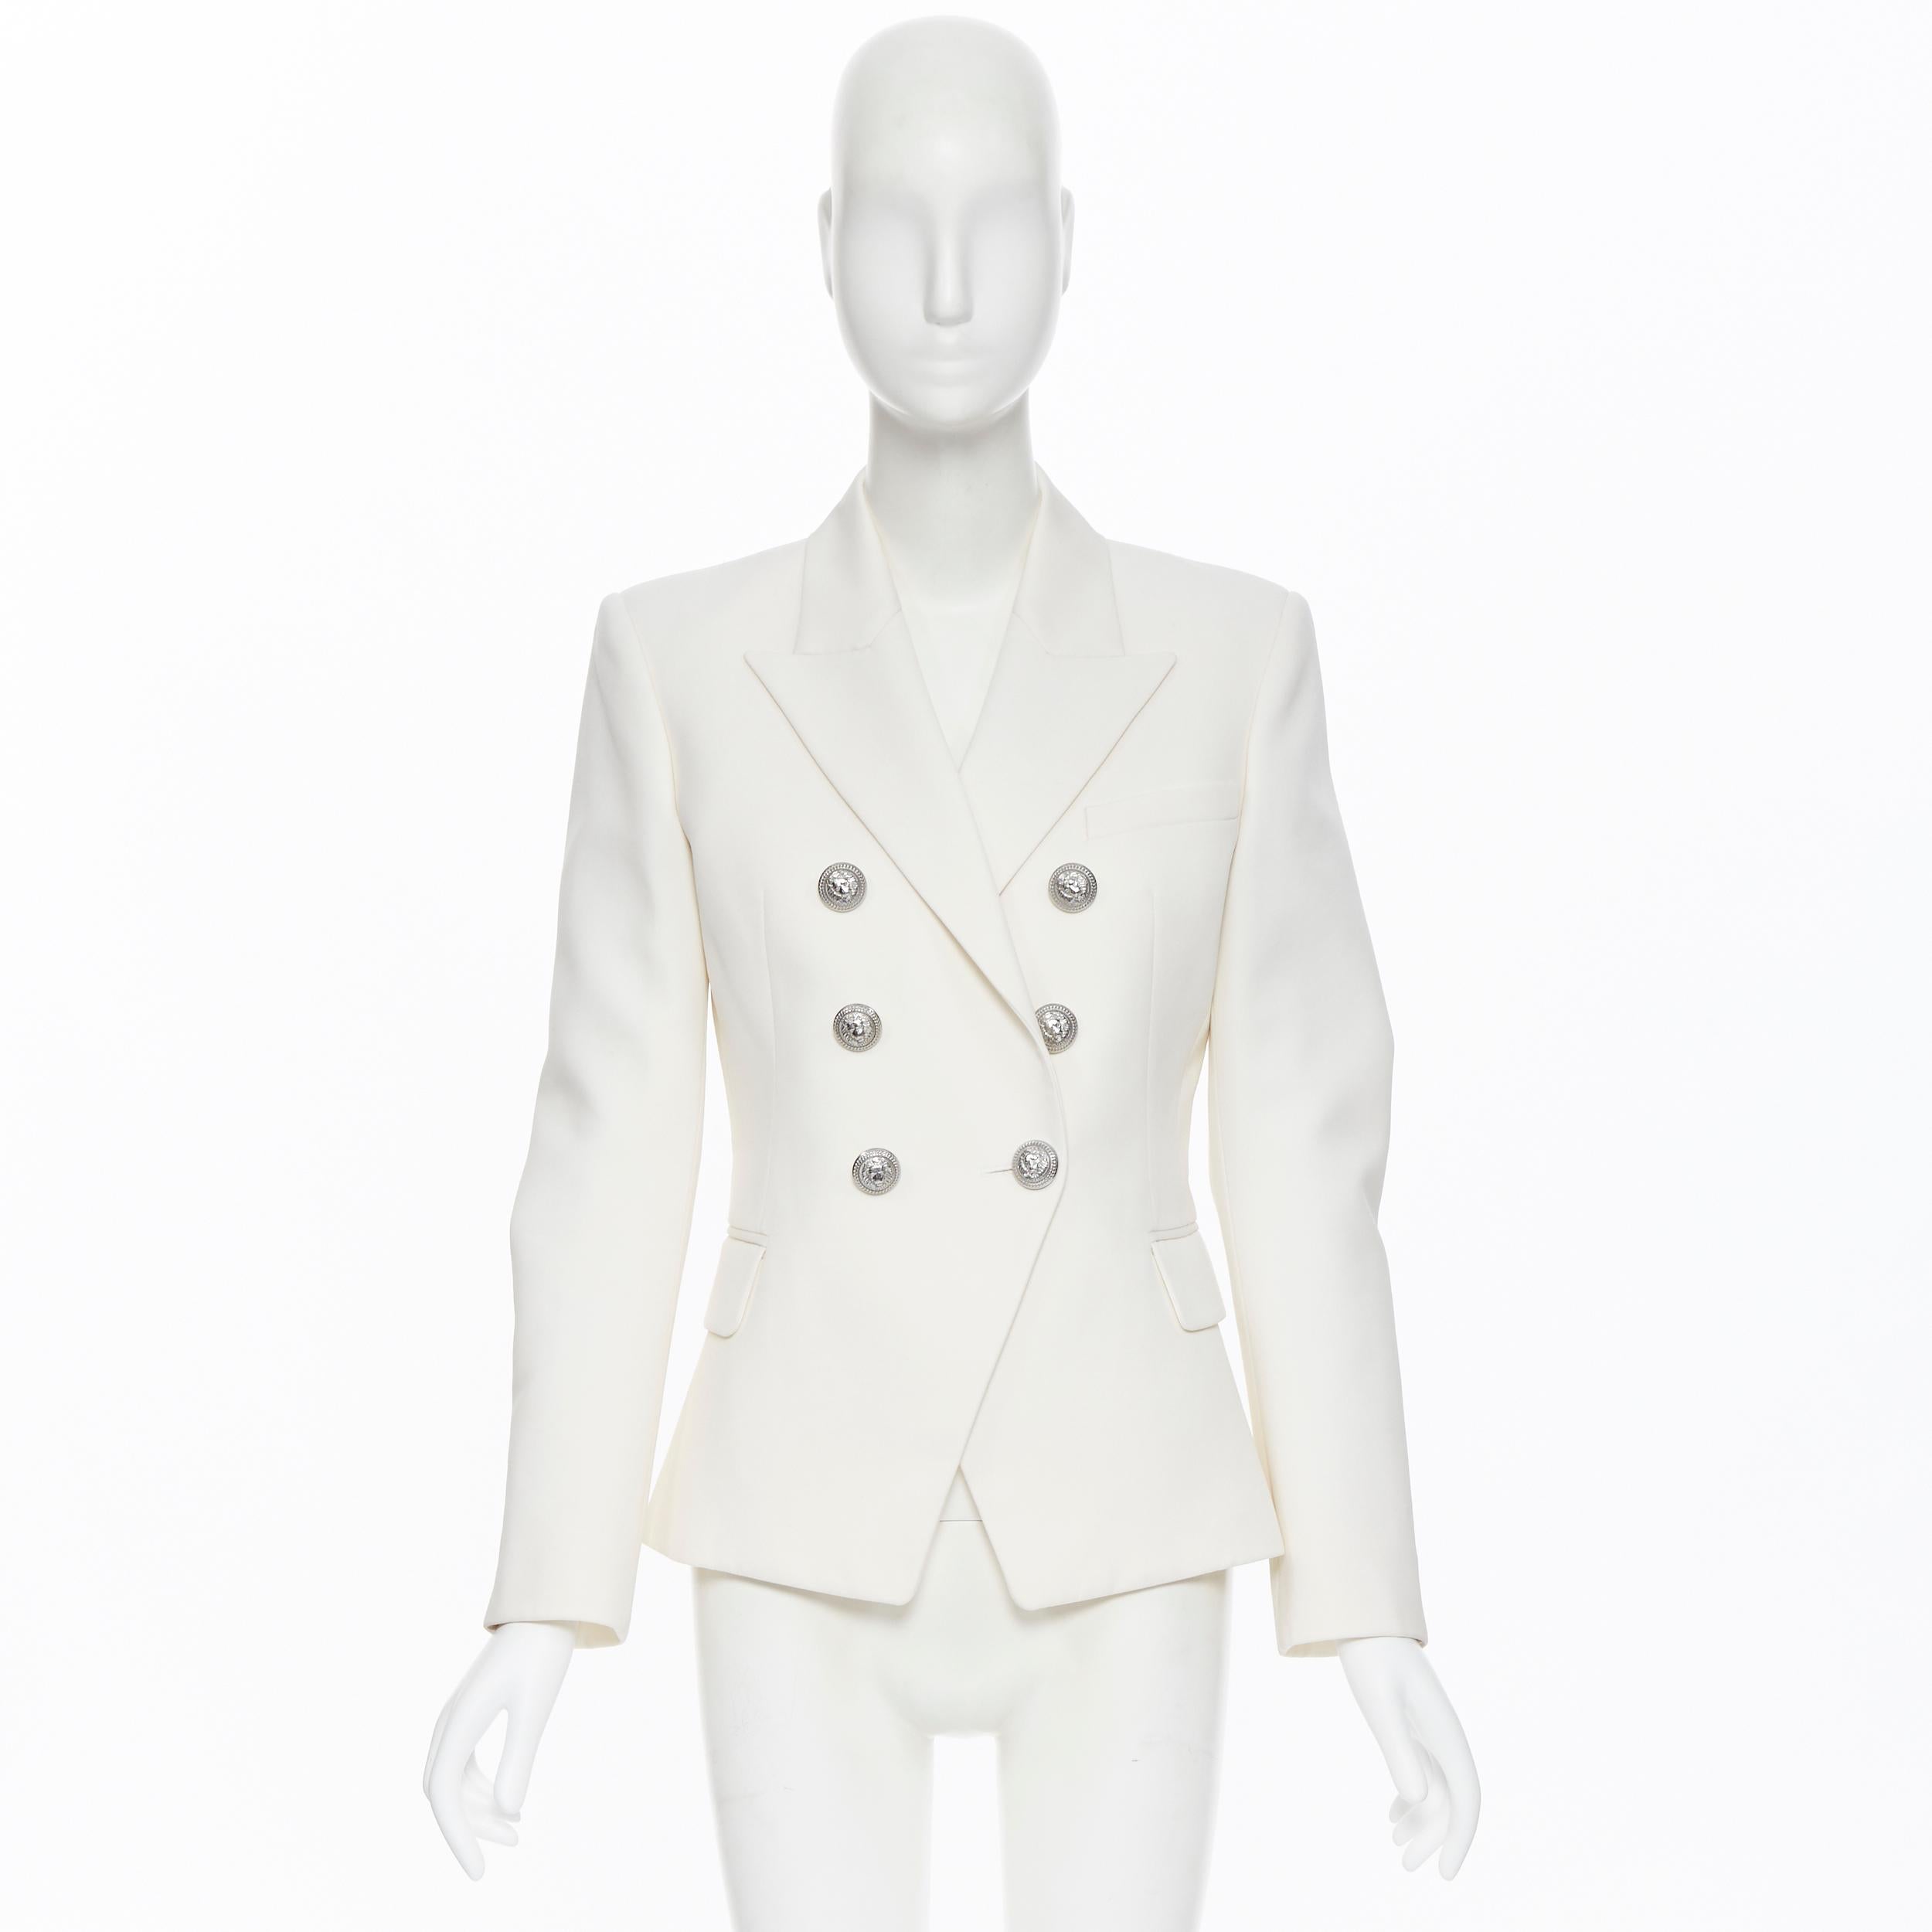 new BALMAIN 100% wool white silver button double breasted blazer jacket FR38 M
Brand: Balmain
Designer: Olivier Rousteing
Model Name / Style: Double breasted jacket
Material: Wool
Color: White
Pattern: Solid
Closure: Button
Extra Detail: A long-time